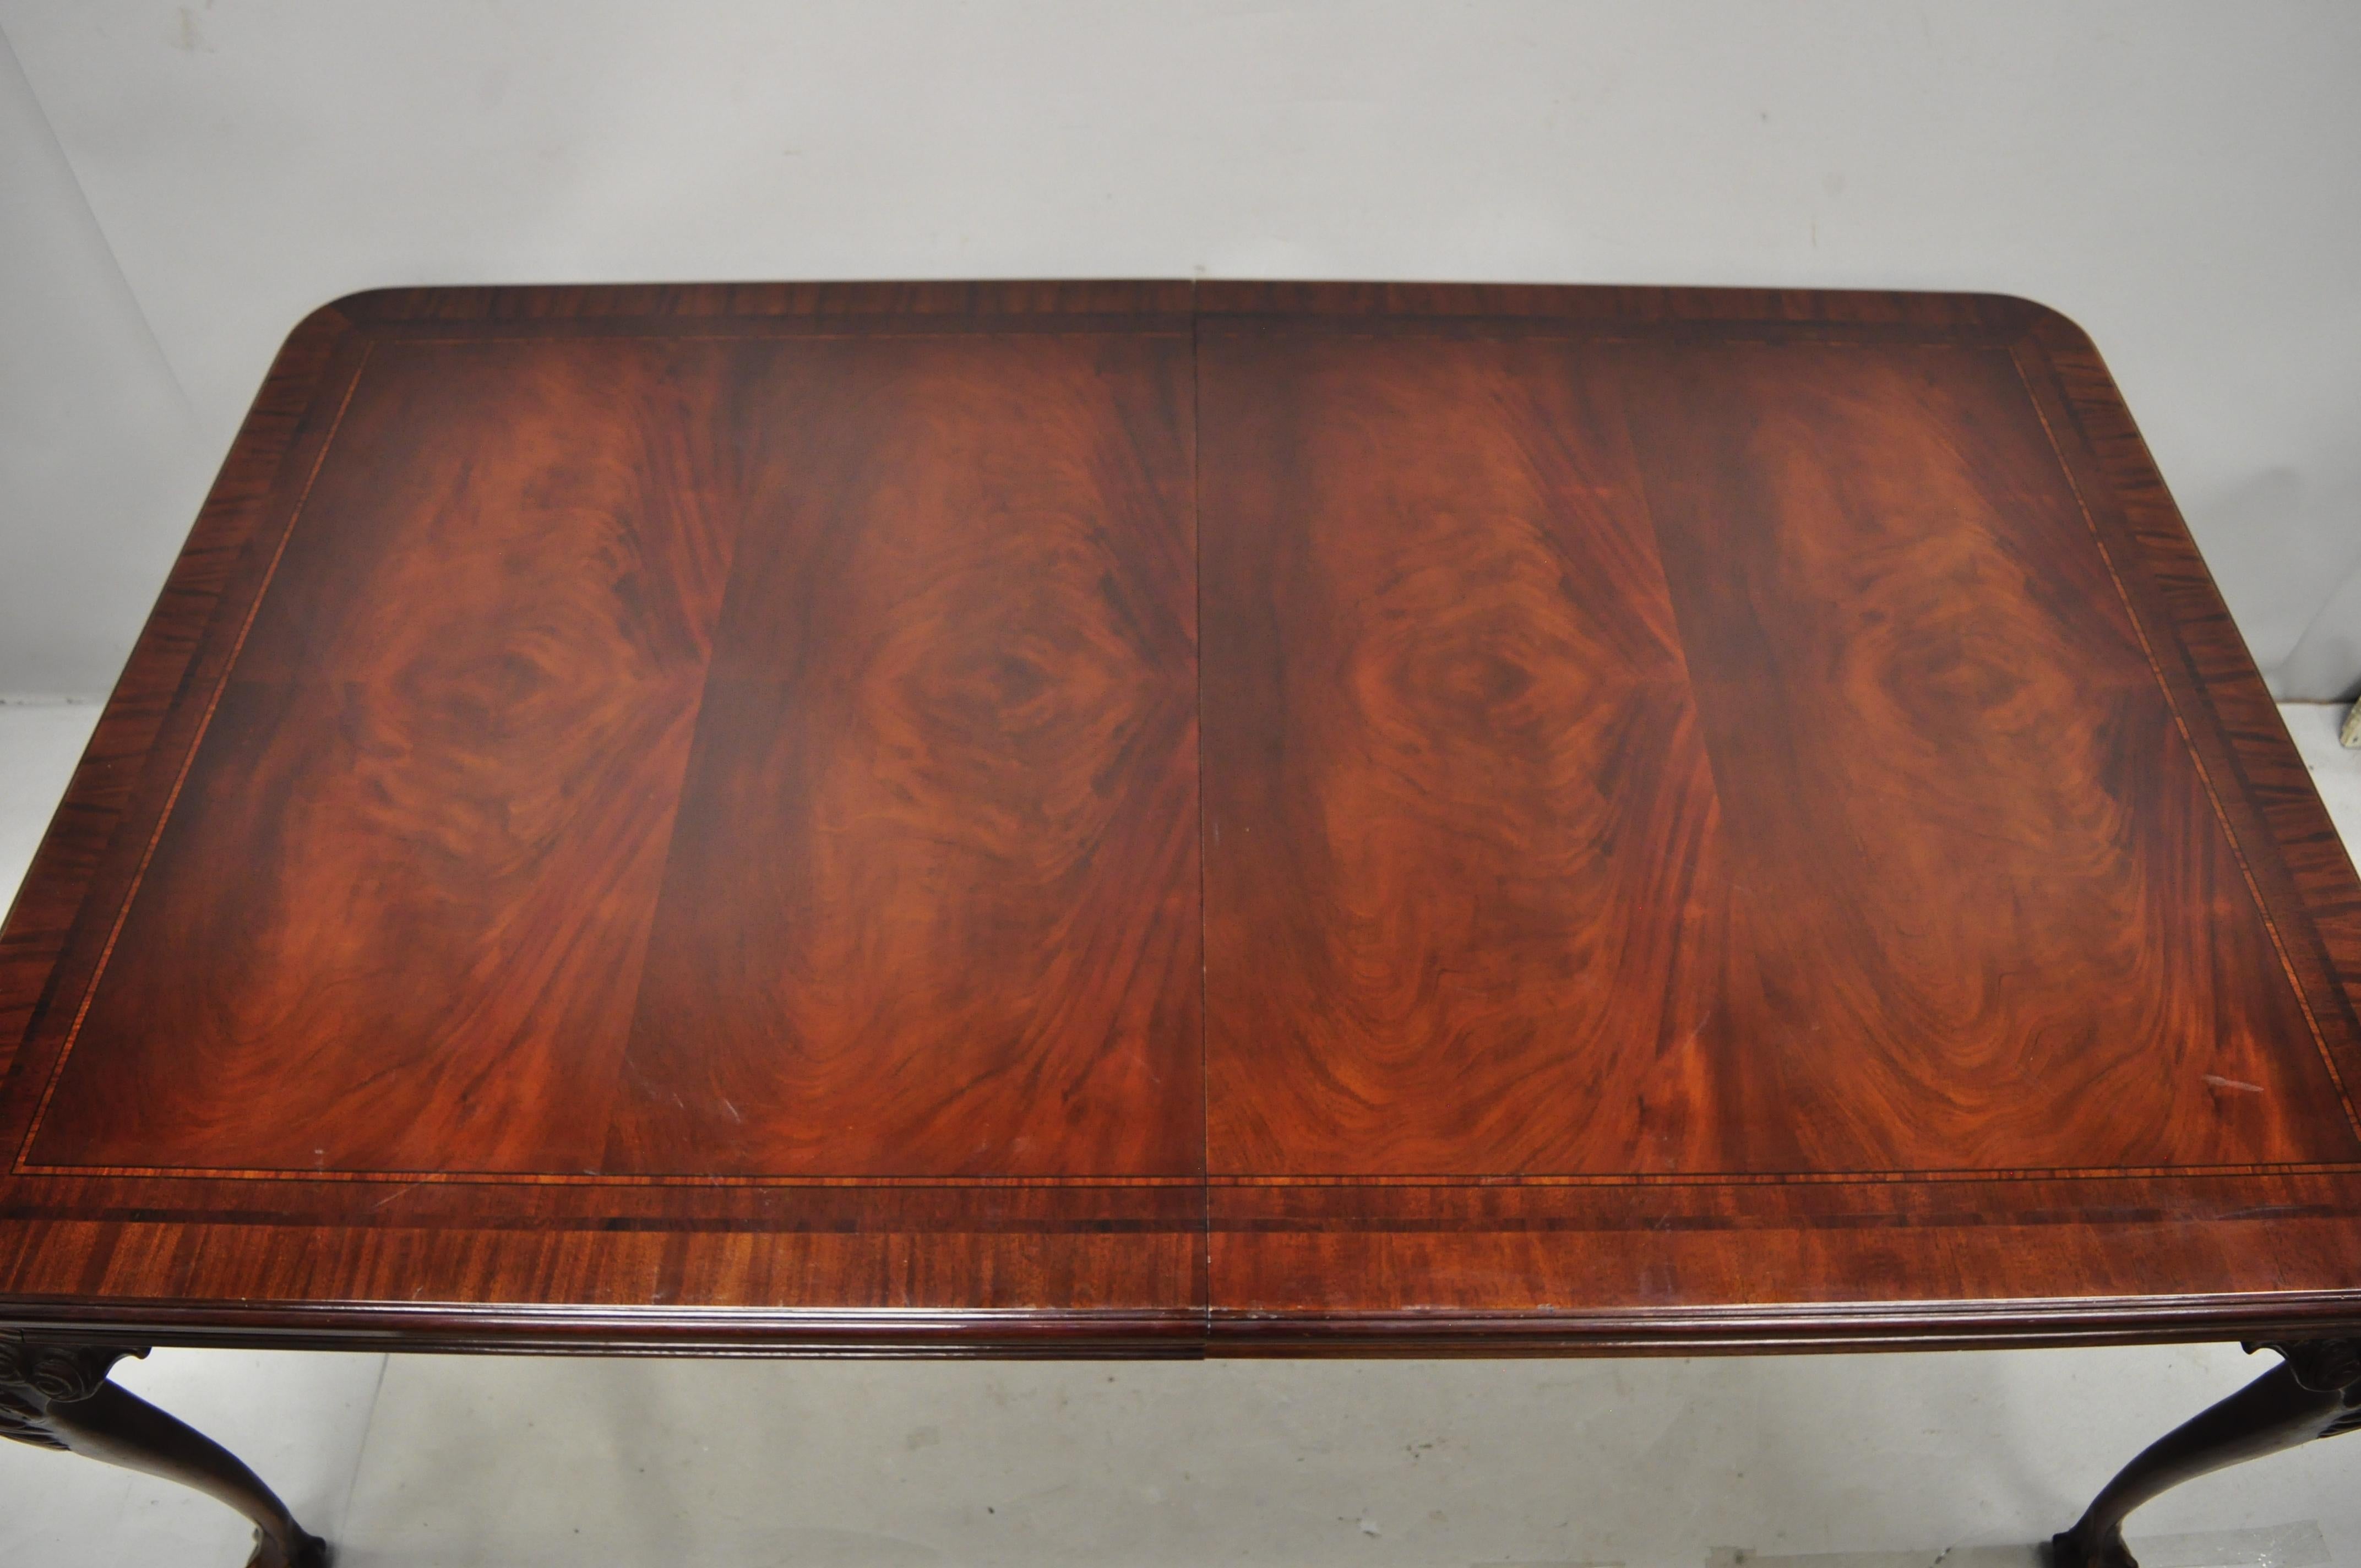 Bernhardt centennial Georgian Chippendale mahogany dining table with 2 leaves. Item features (2) 24